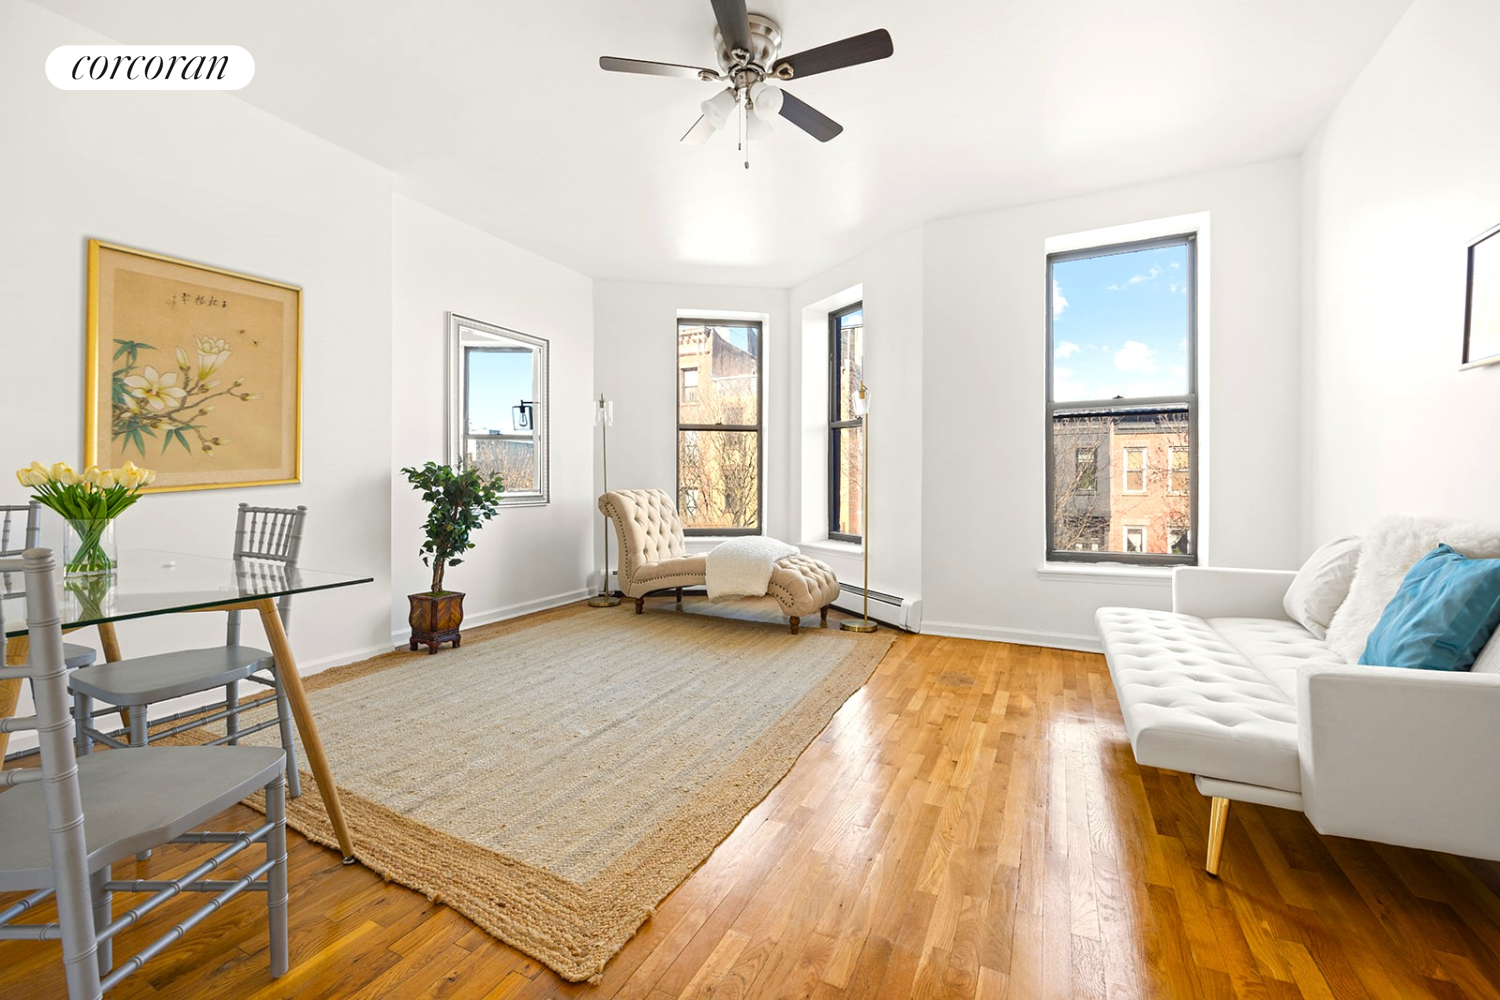 918 Lafayette Avenue, Stuyvesant Heights, Downtown, NYC - 6 Bedrooms  
2.5 Bathrooms  
10 Rooms - 